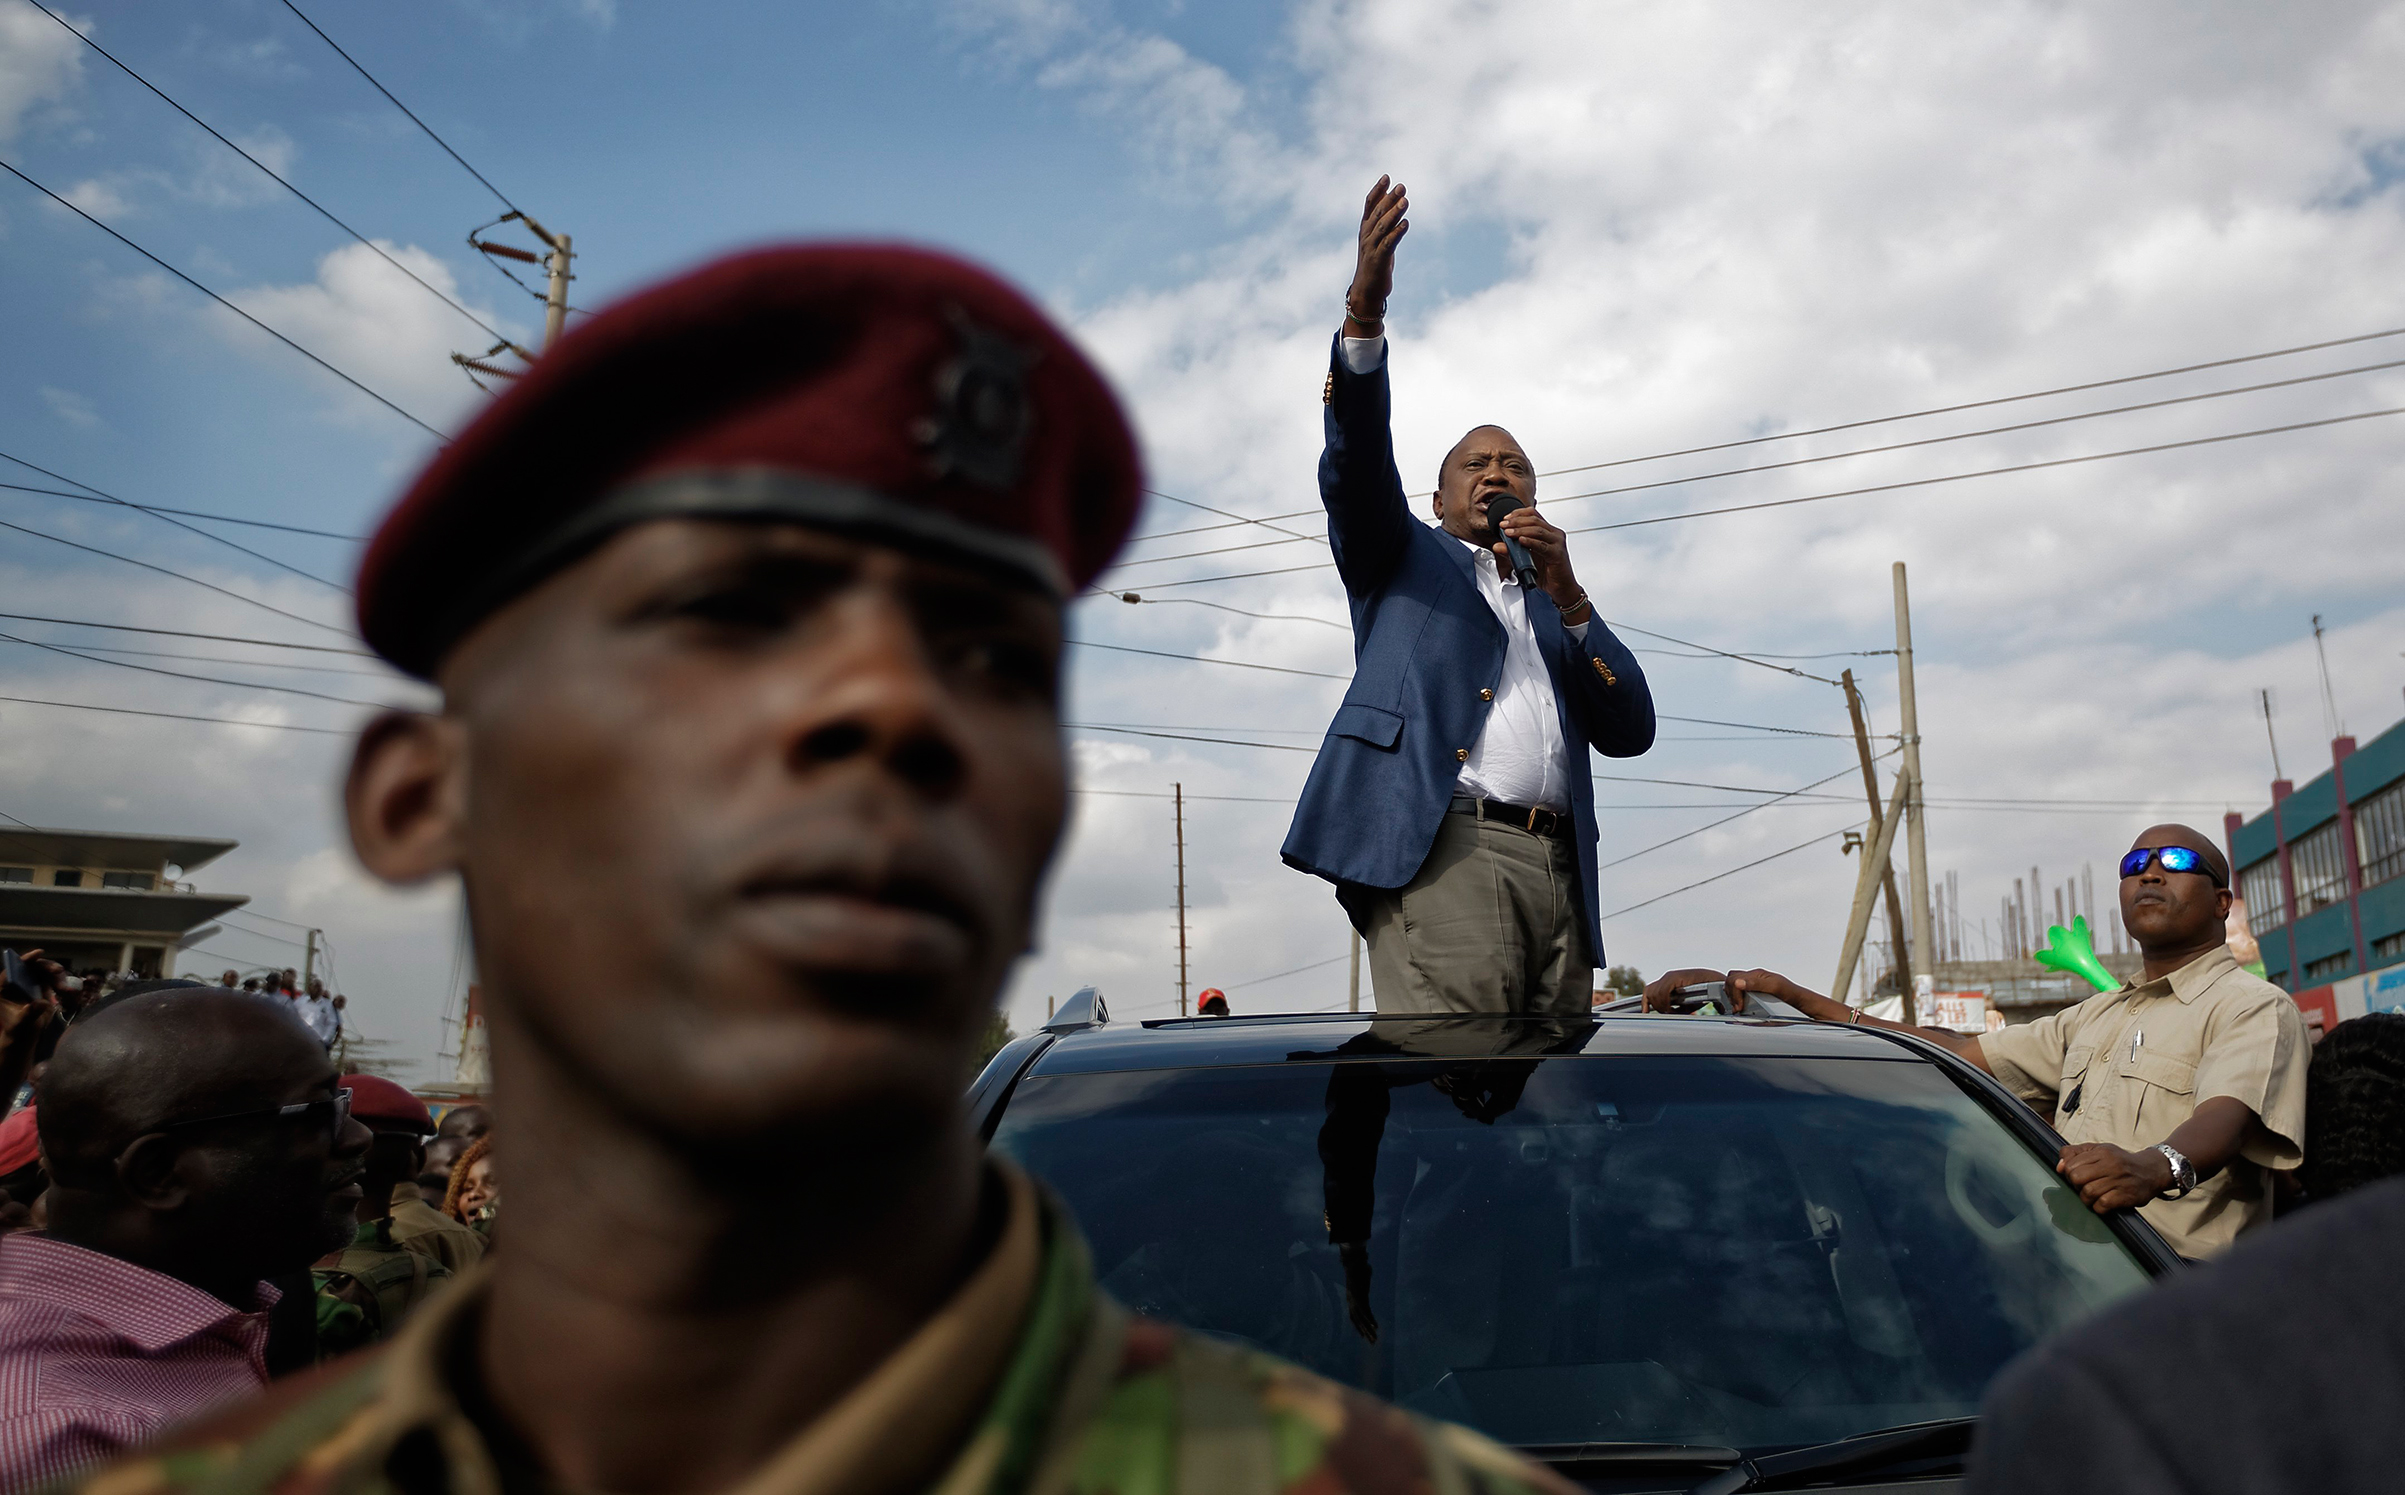 Kenya's President Uhuru Kenyatta, standing through the sunroof of the presidential vehicle, addresses his supporters as a presidential guard provides security, left, on a street in Ongata Rongai, on the outskirts of Nairobi, Kenya, Sept. 5, 2017. Kenya faces an Oct. 17 vote after the Supreme Court nullified Kenyatta's re-election but opposition leader Raila Odinga said Tuesday he does not accept the date, demanding reforms to the electoral commission and other "legal and constitutional guarantees." (Ben Curtis—AP)